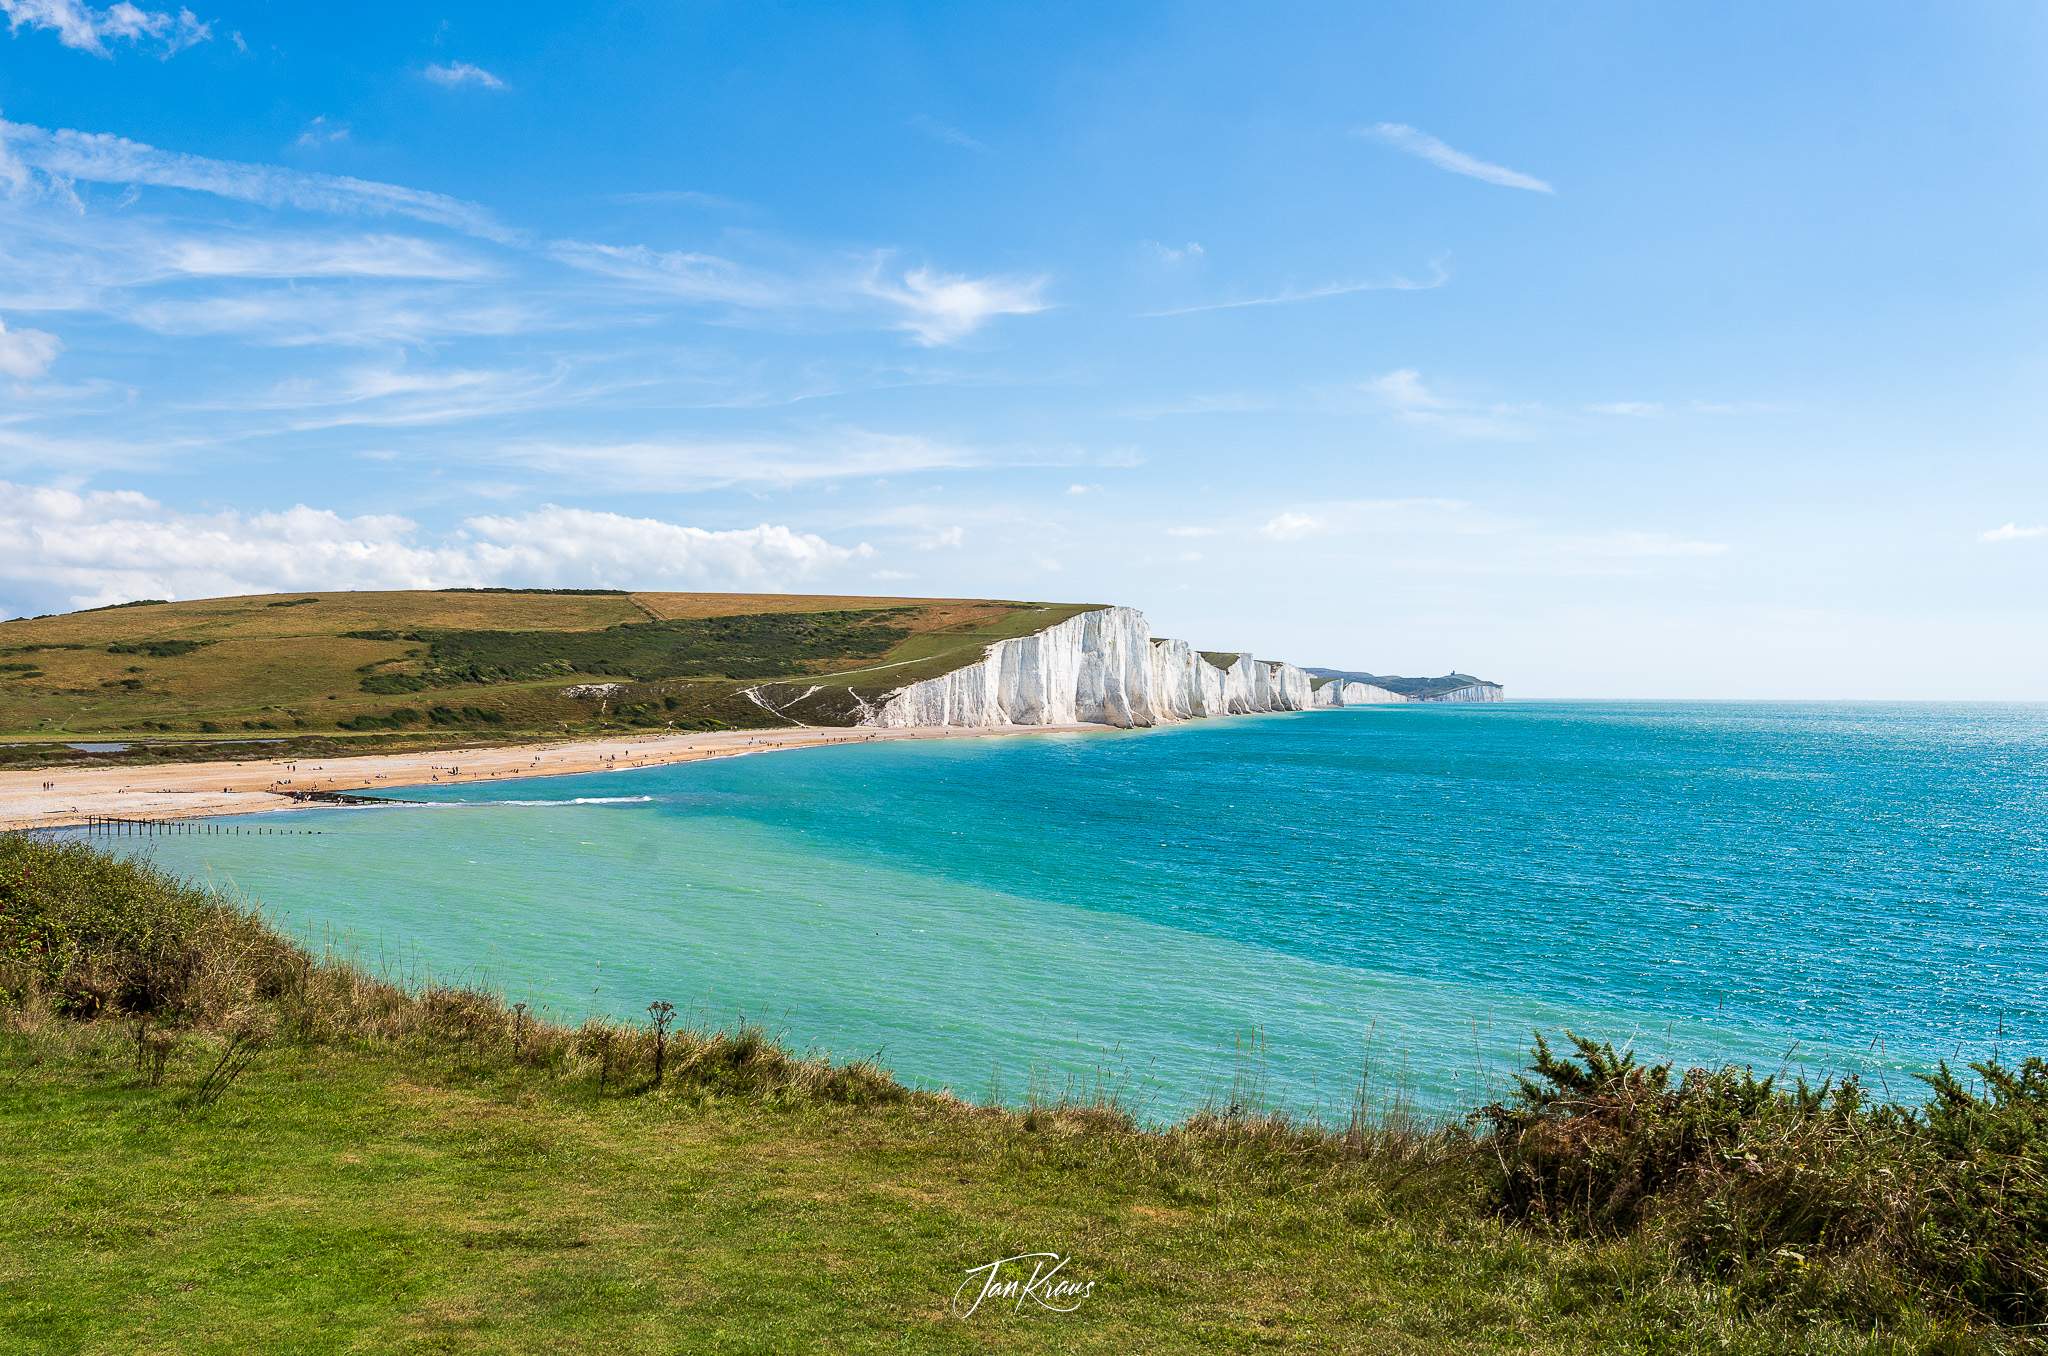 The Seven Sister Cliffs seen from the walk, East Sussex, England, UK